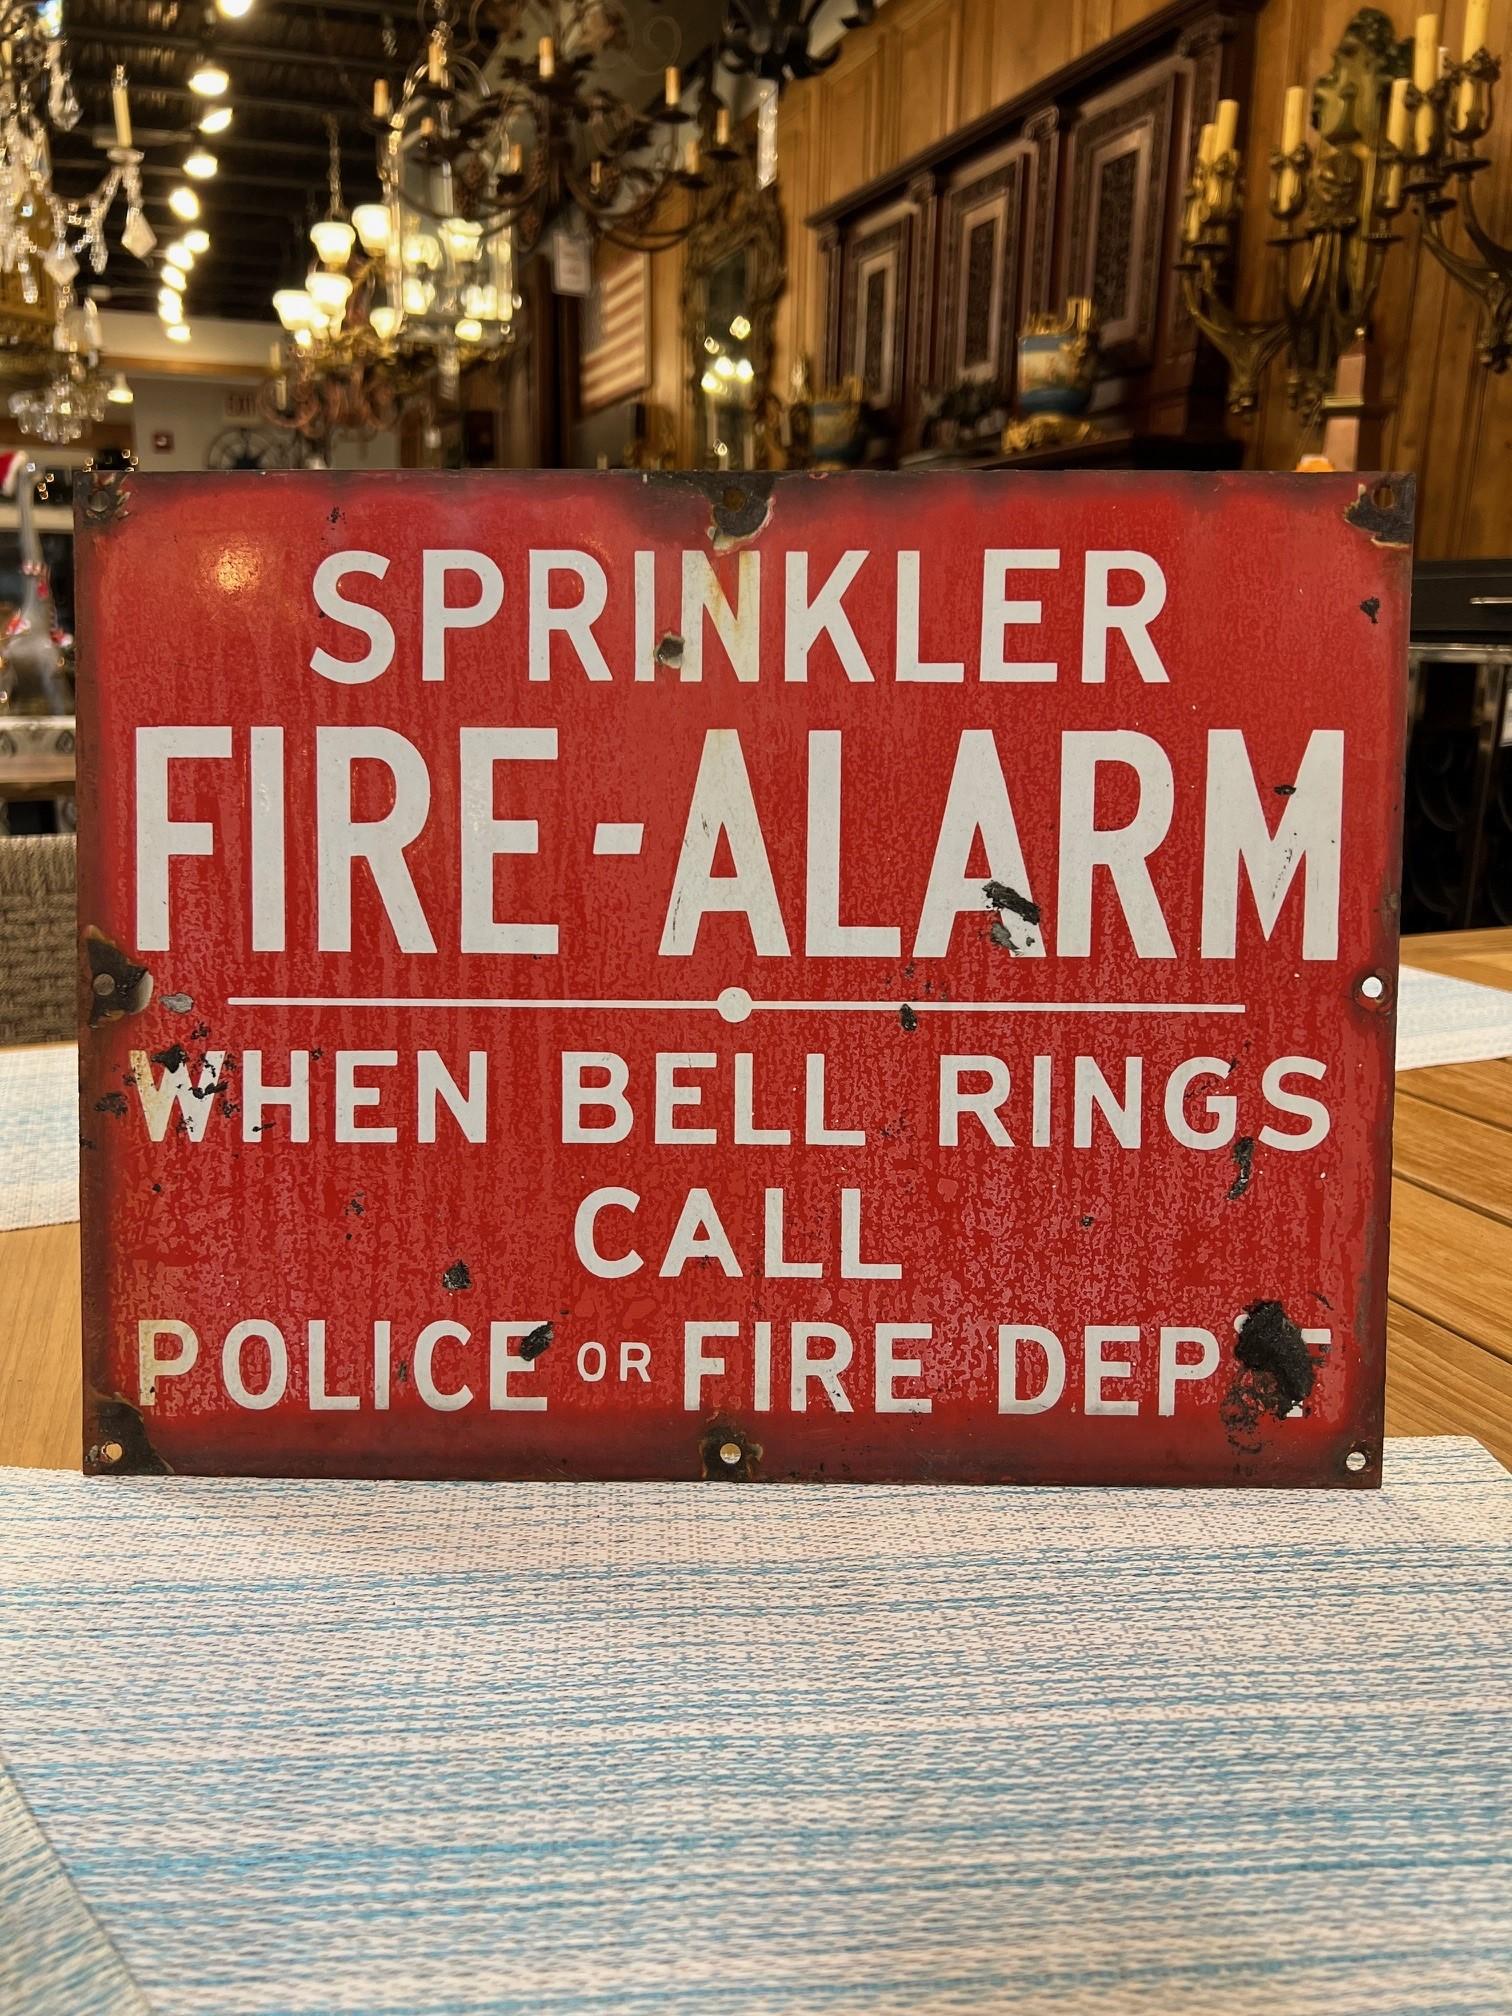 Great Vintage porcelain sign-enameled metal sign, Sprinkler Fire Alarm when bell rings call   Police or Fire Dept. This sign came off an industrial building built in the late 1940s. The sign was attached to the building under a bell that would ring